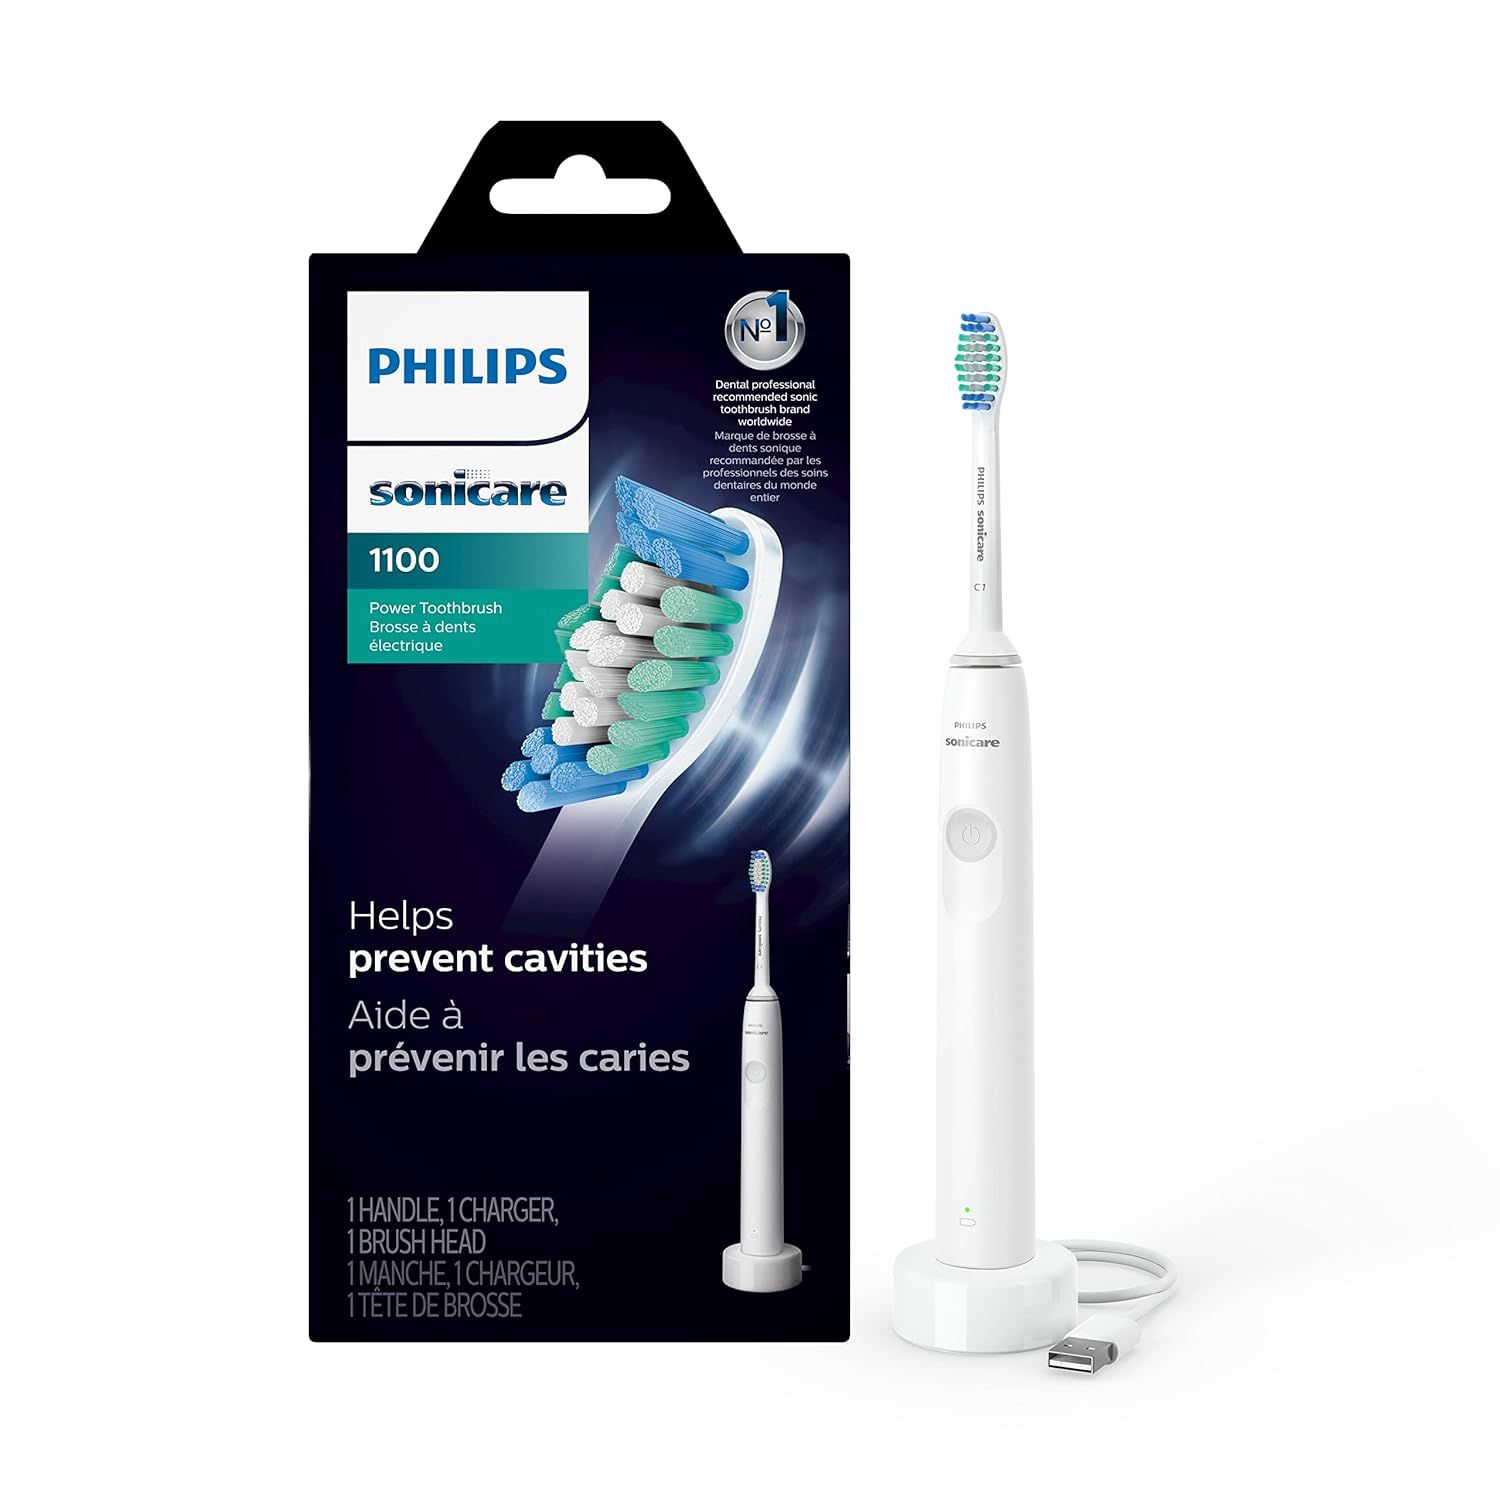 Philips Sonicare 1100 Electric Rechargeable Power Toothbrush, White Grey HX3641/02 | Amazon (US)